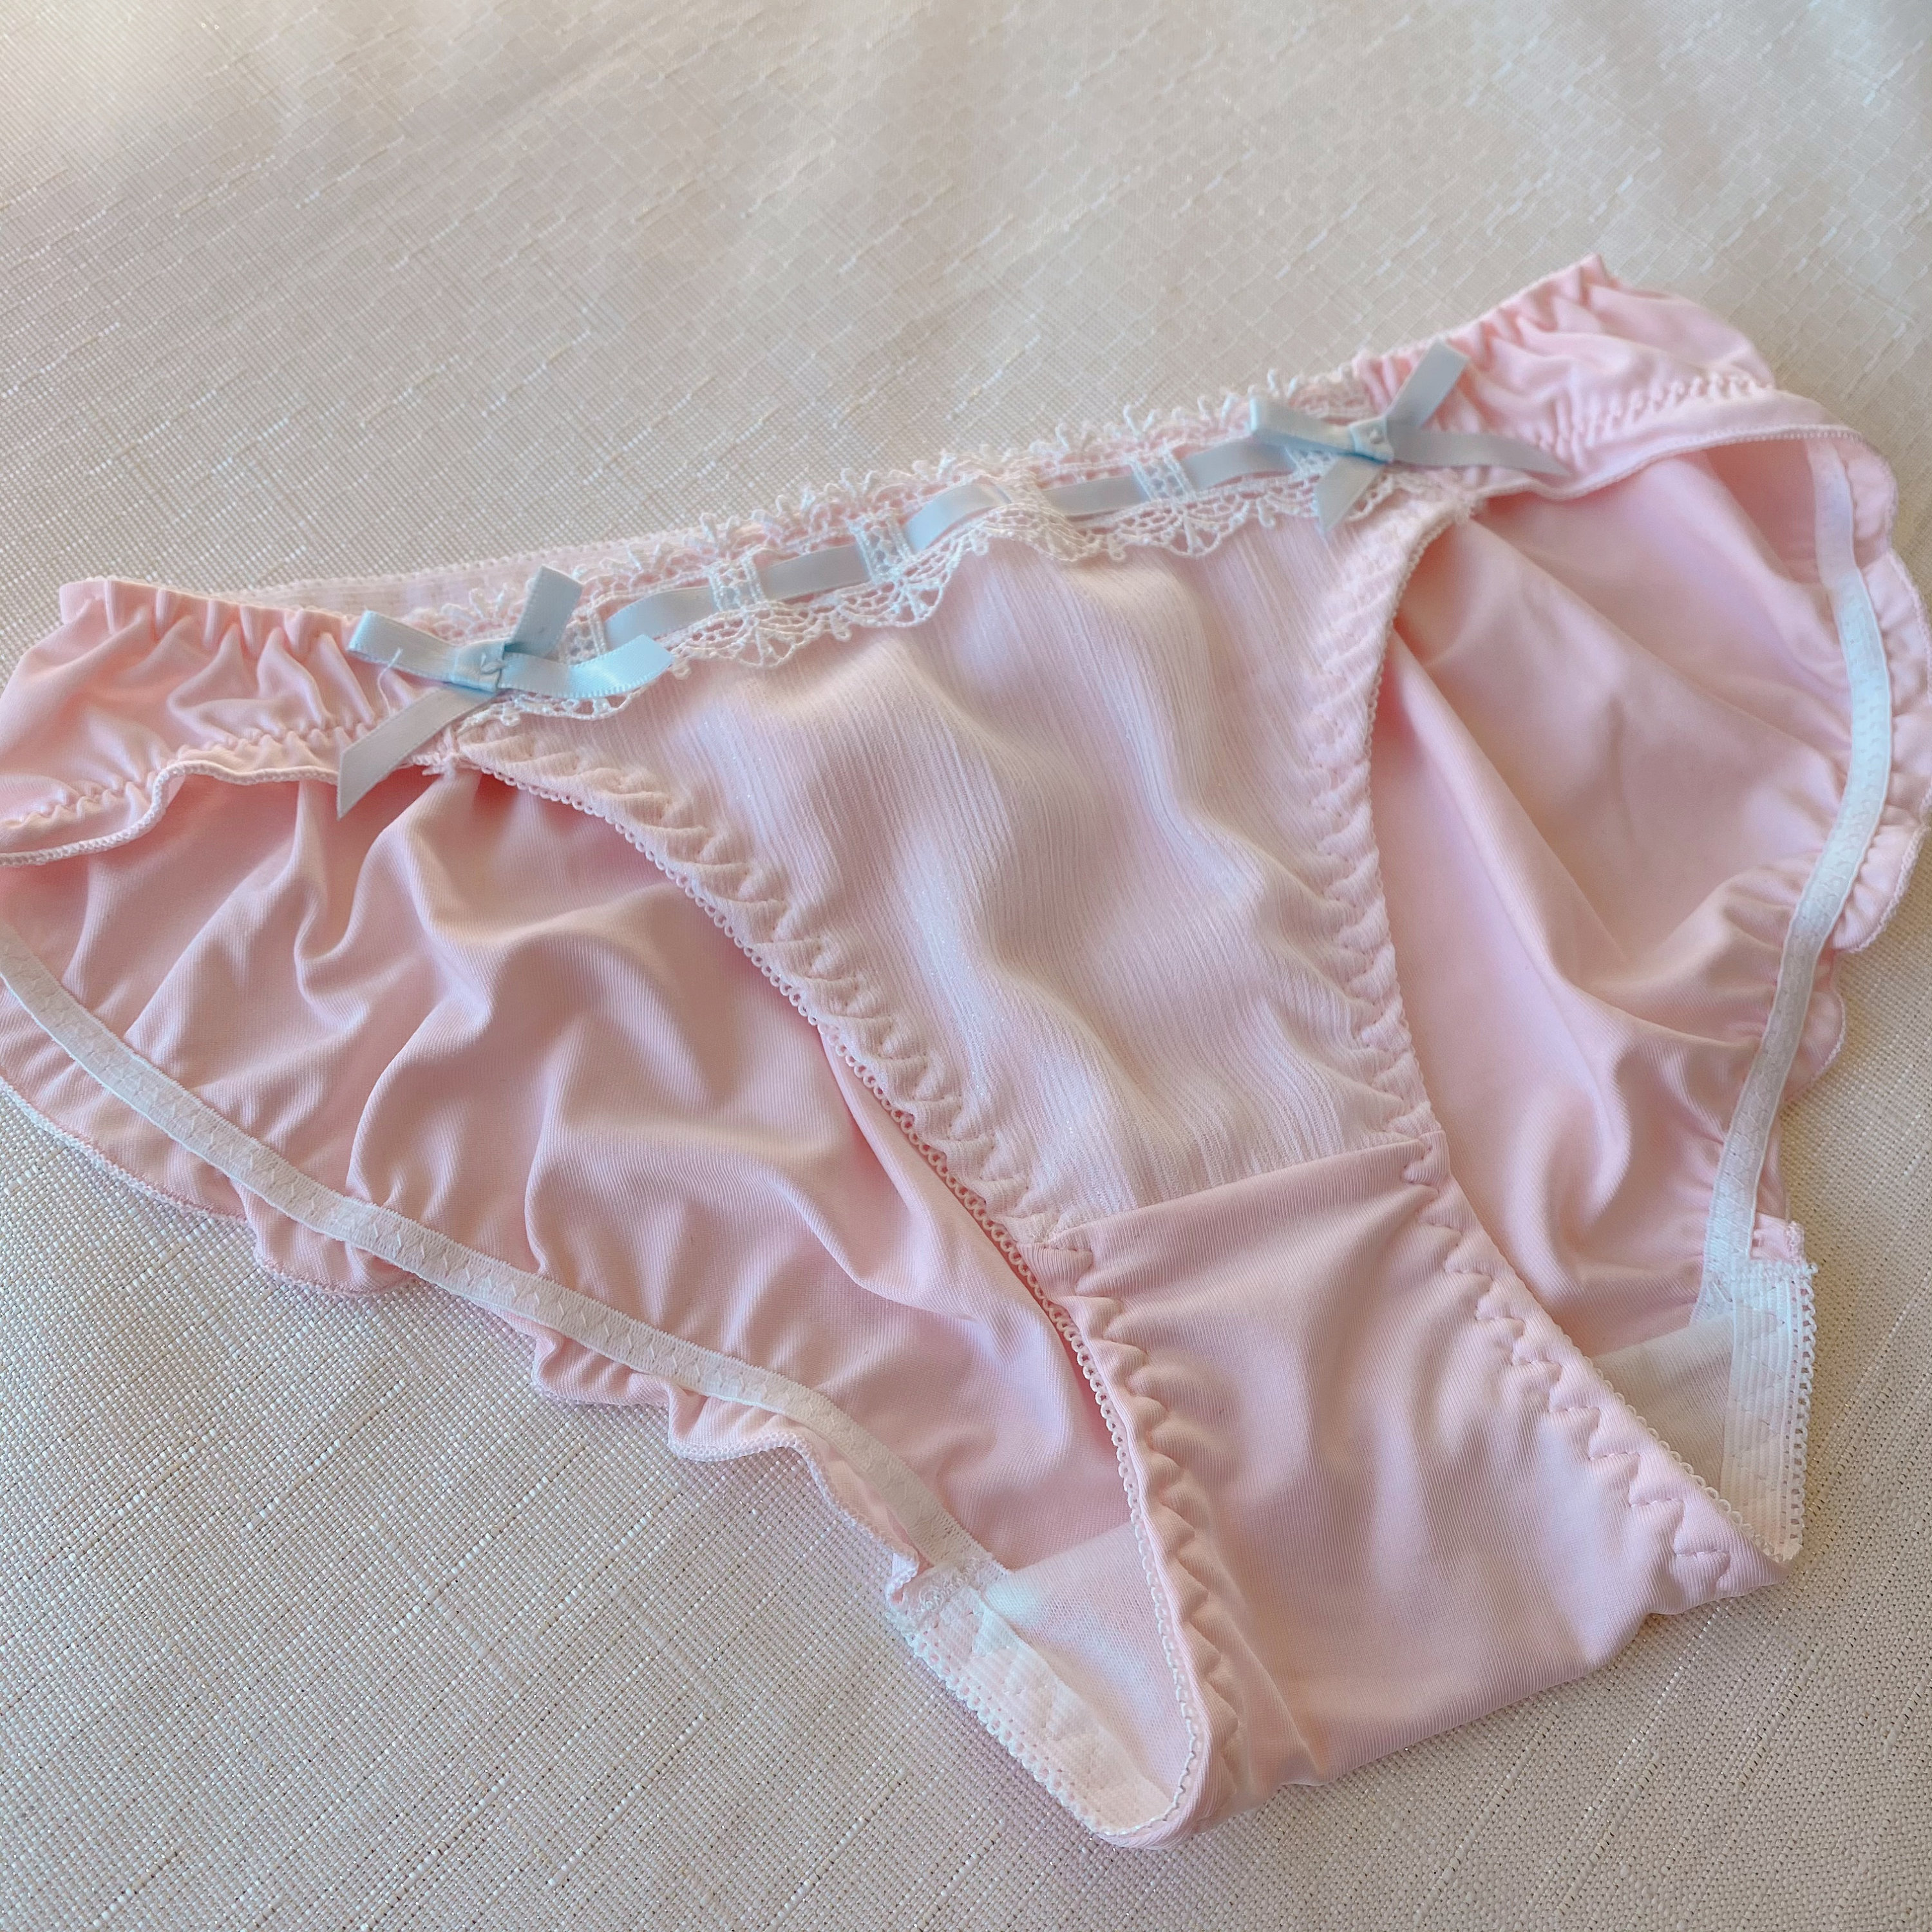 Silk Panty/cute Lingerie Lace Panties/silky Touch Comfortable - Etsy